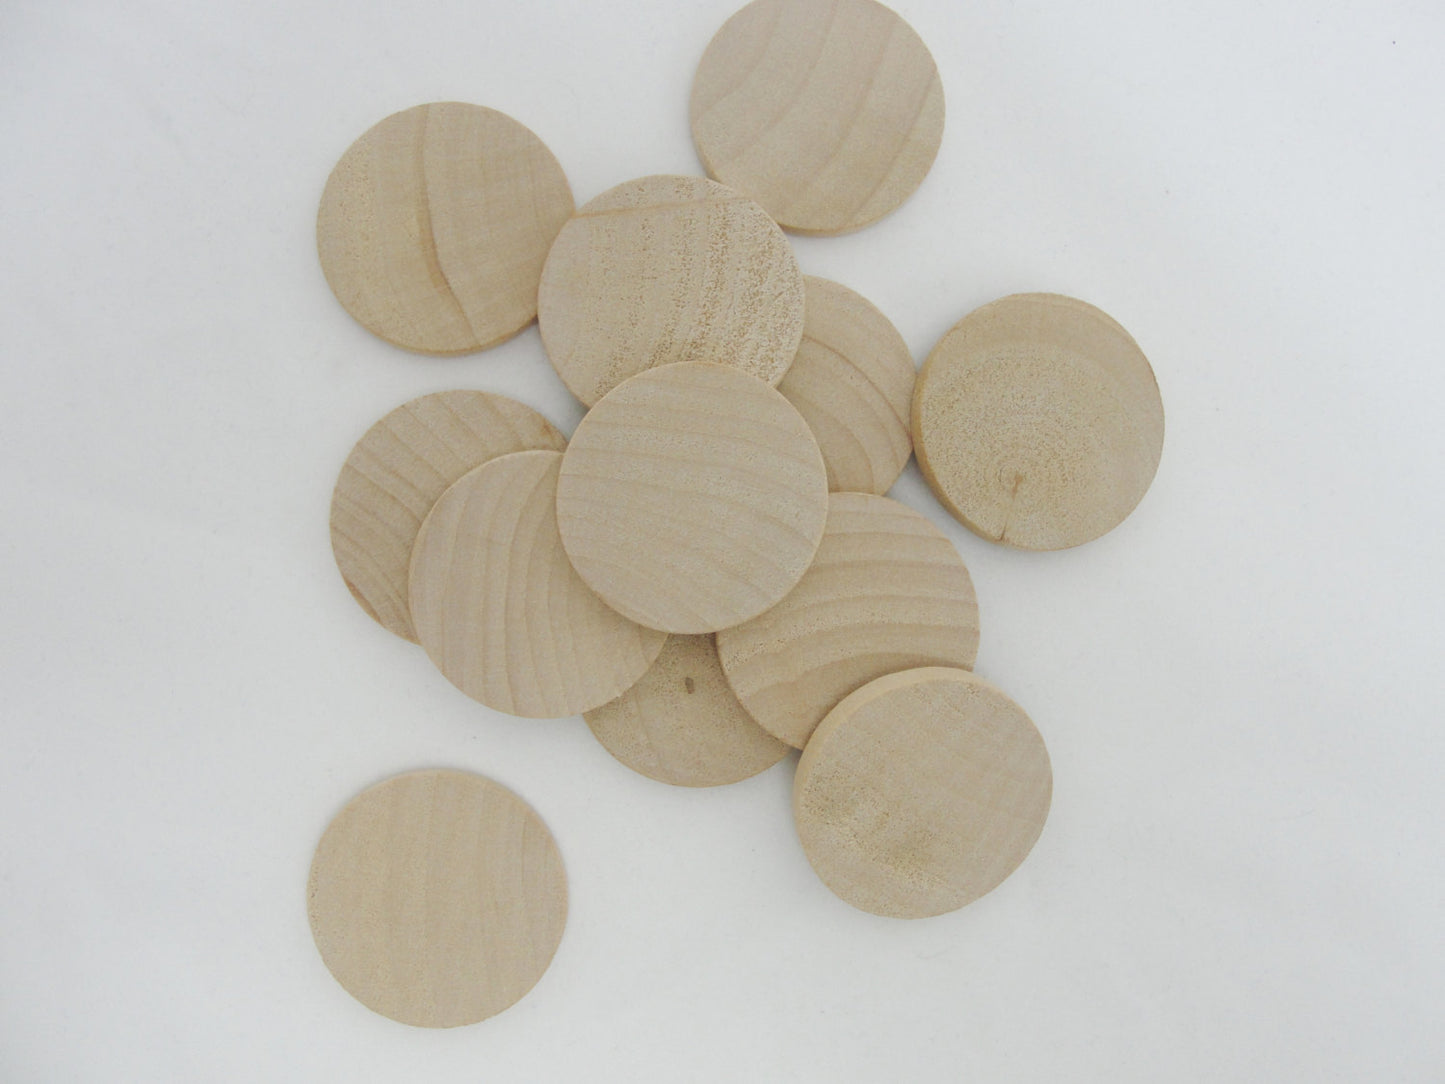 12 Wood Circles or discs 1 3/4" (1.75") wood 3/16" thick unfinished DIY